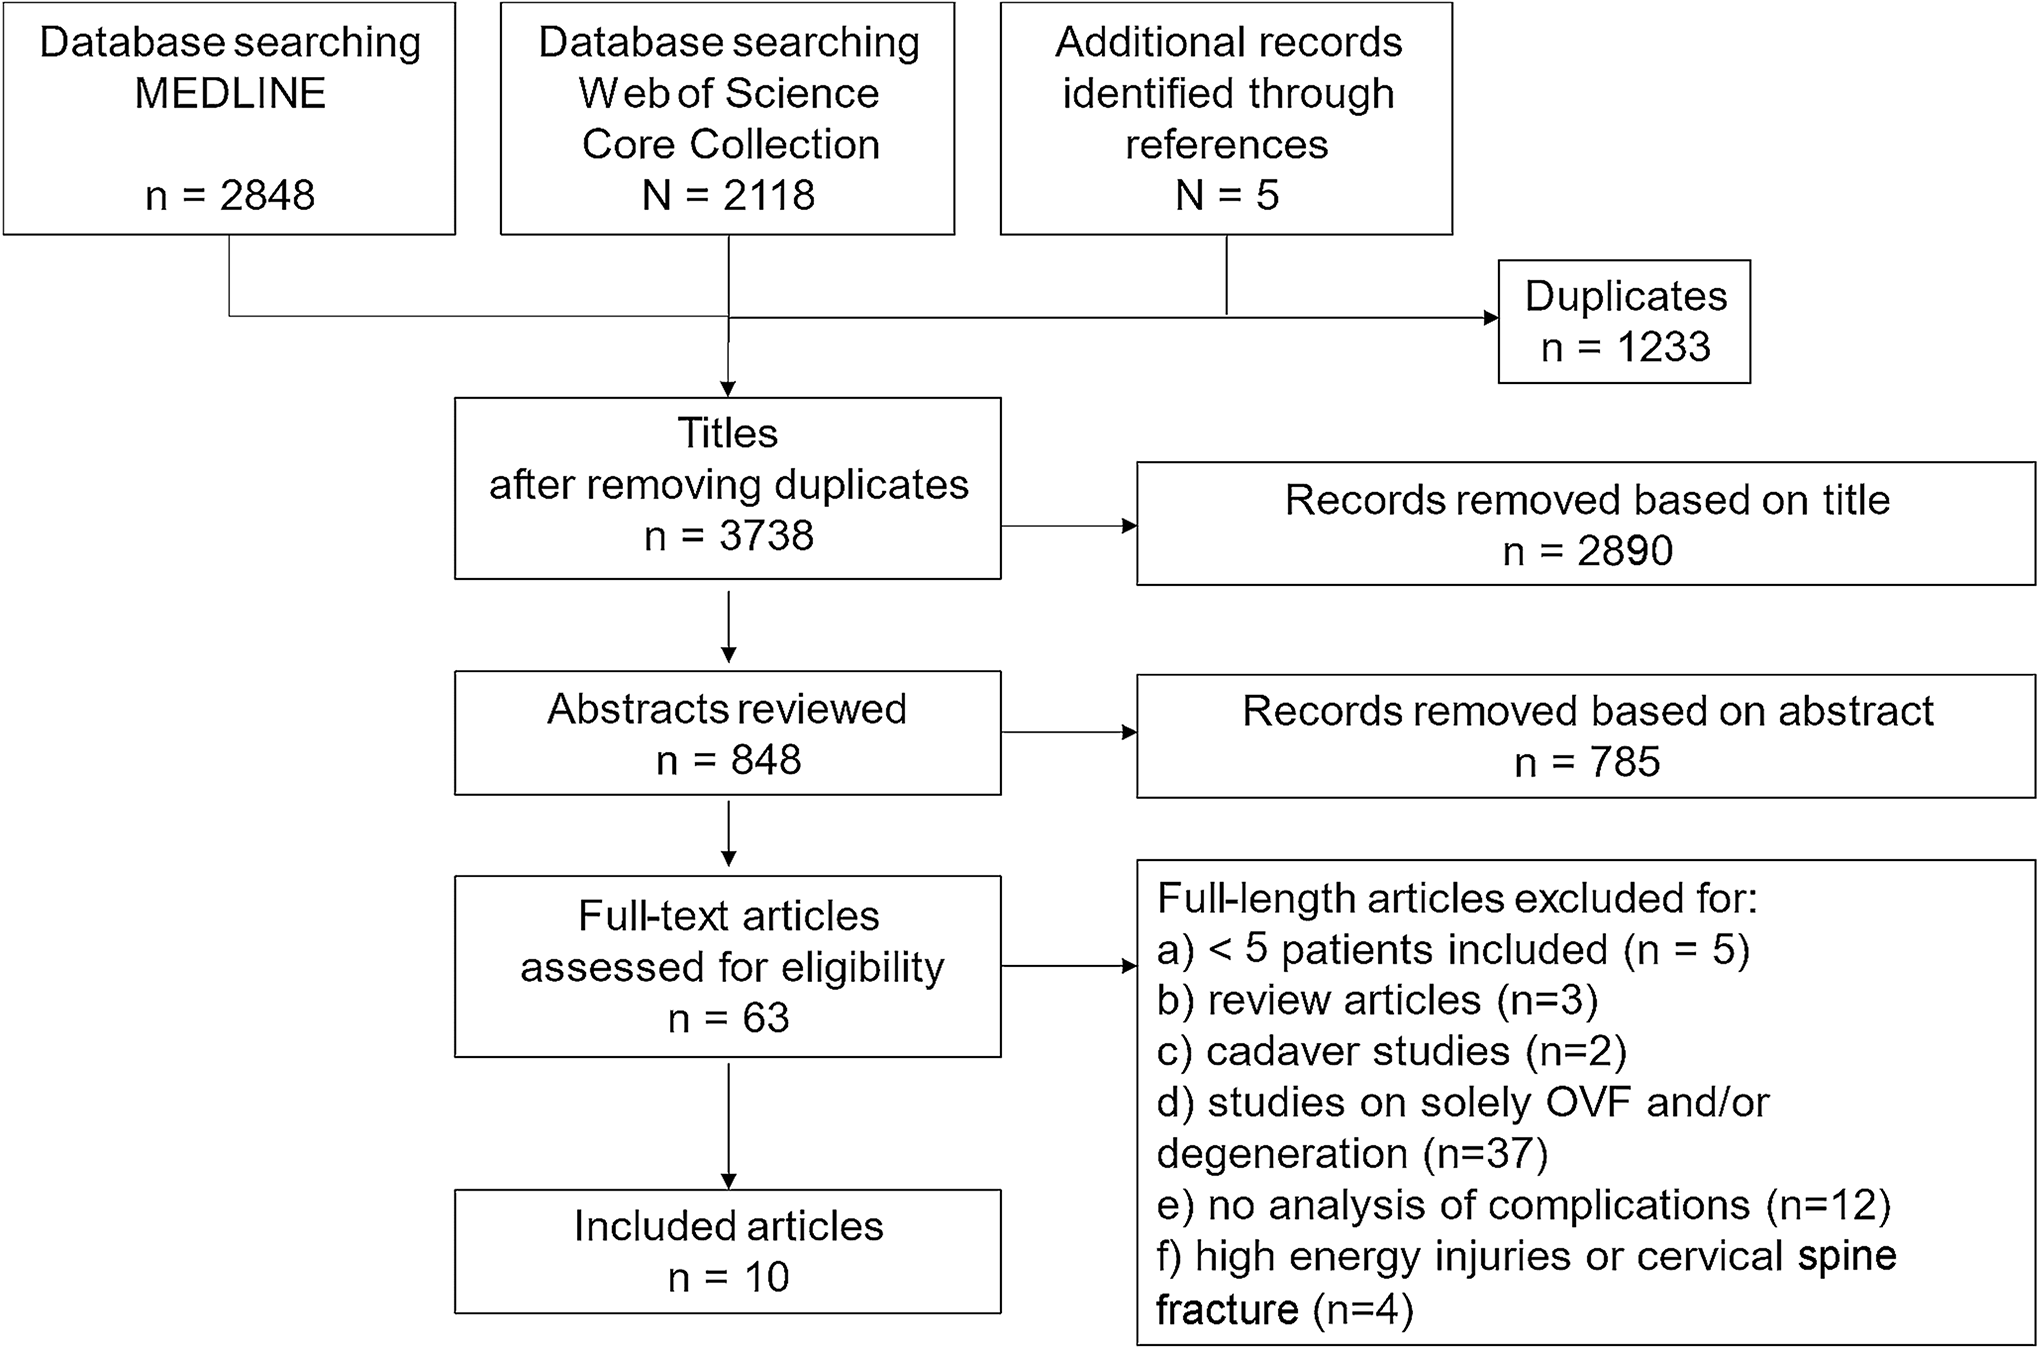 The relation of osteoporotic vertebral fractures and spine degeneration on the occurrence of complications: a systematic review